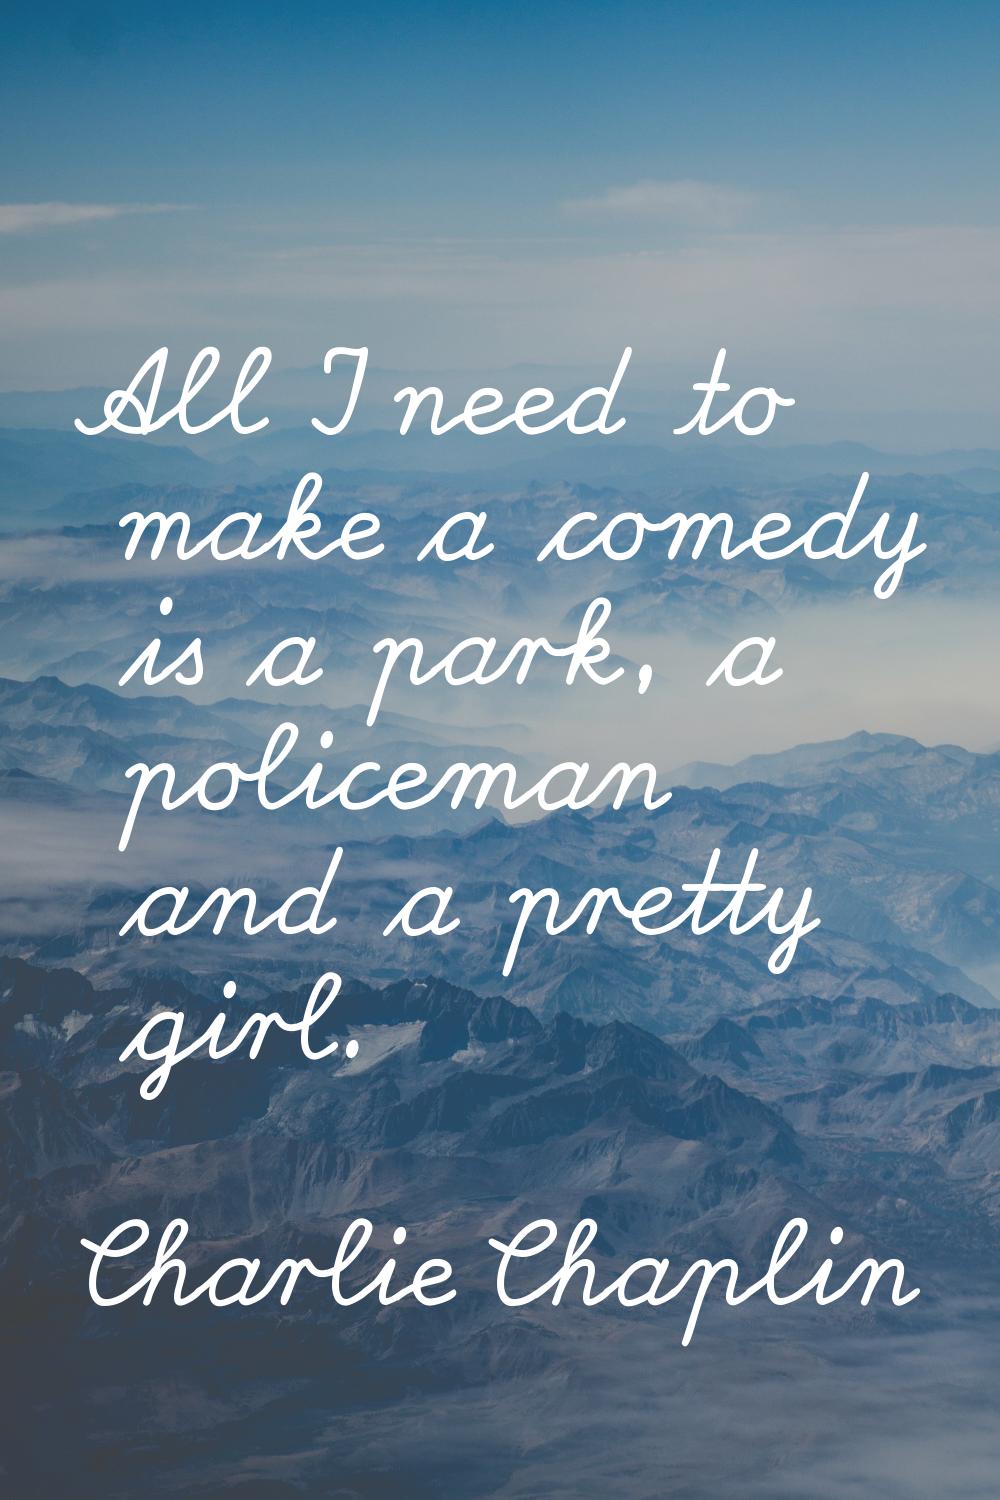 All I need to make a comedy is a park, a policeman and a pretty girl.